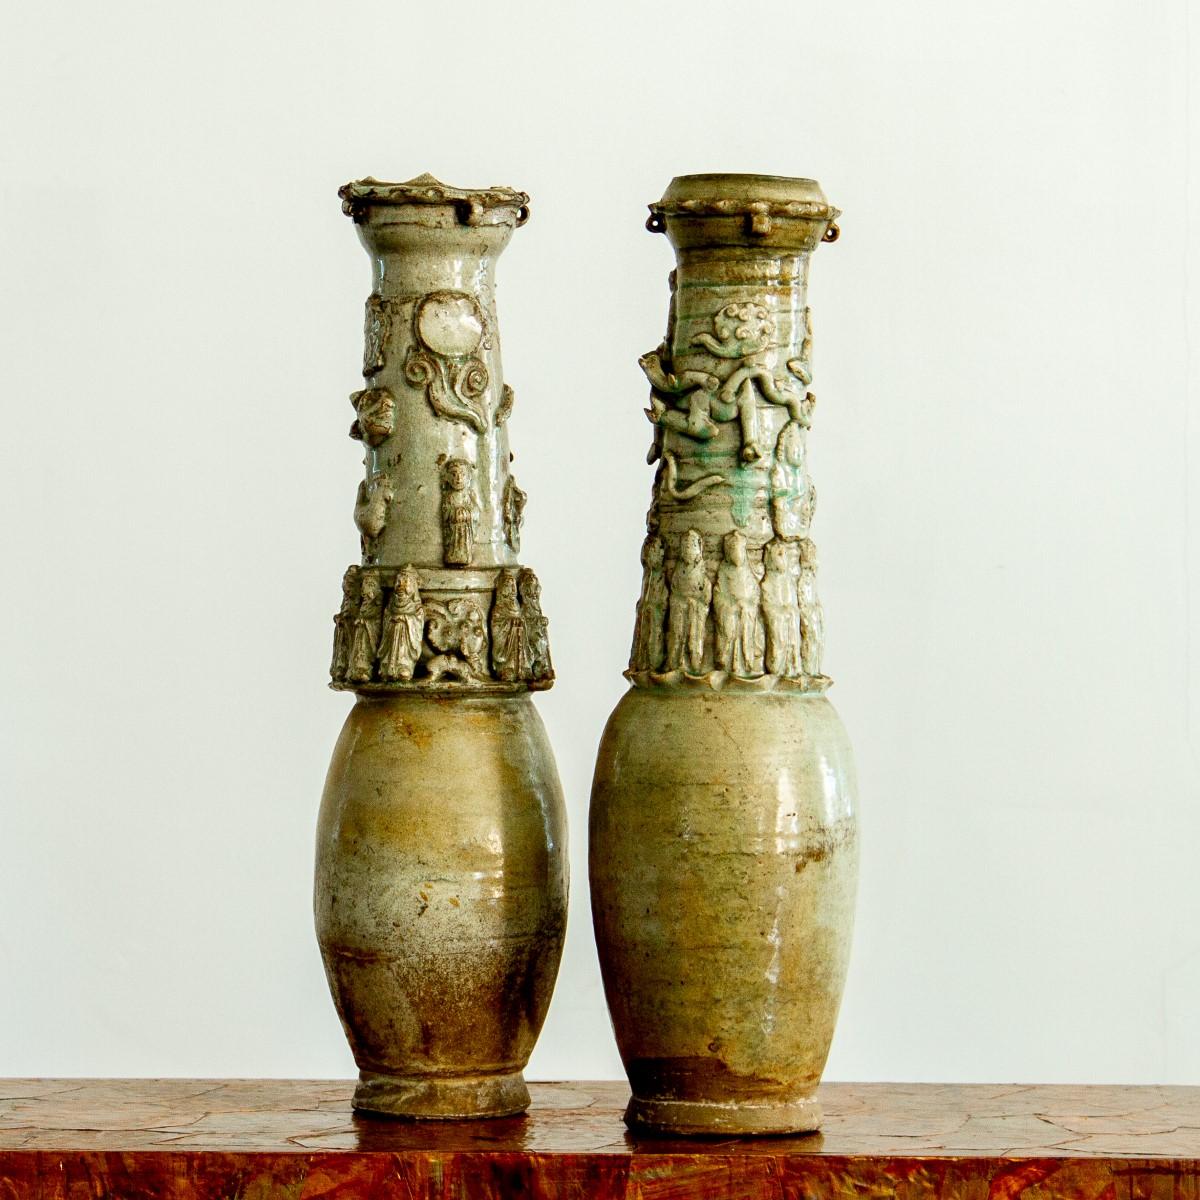 A rare pair of Chinese Song dynasty, Qingbai funerary earthenware vases, highly decorated with a band of attendant figures, dragons and animals to the neck of the tall vases.

These vases have a lovely green glaze with dark green streaks.

The